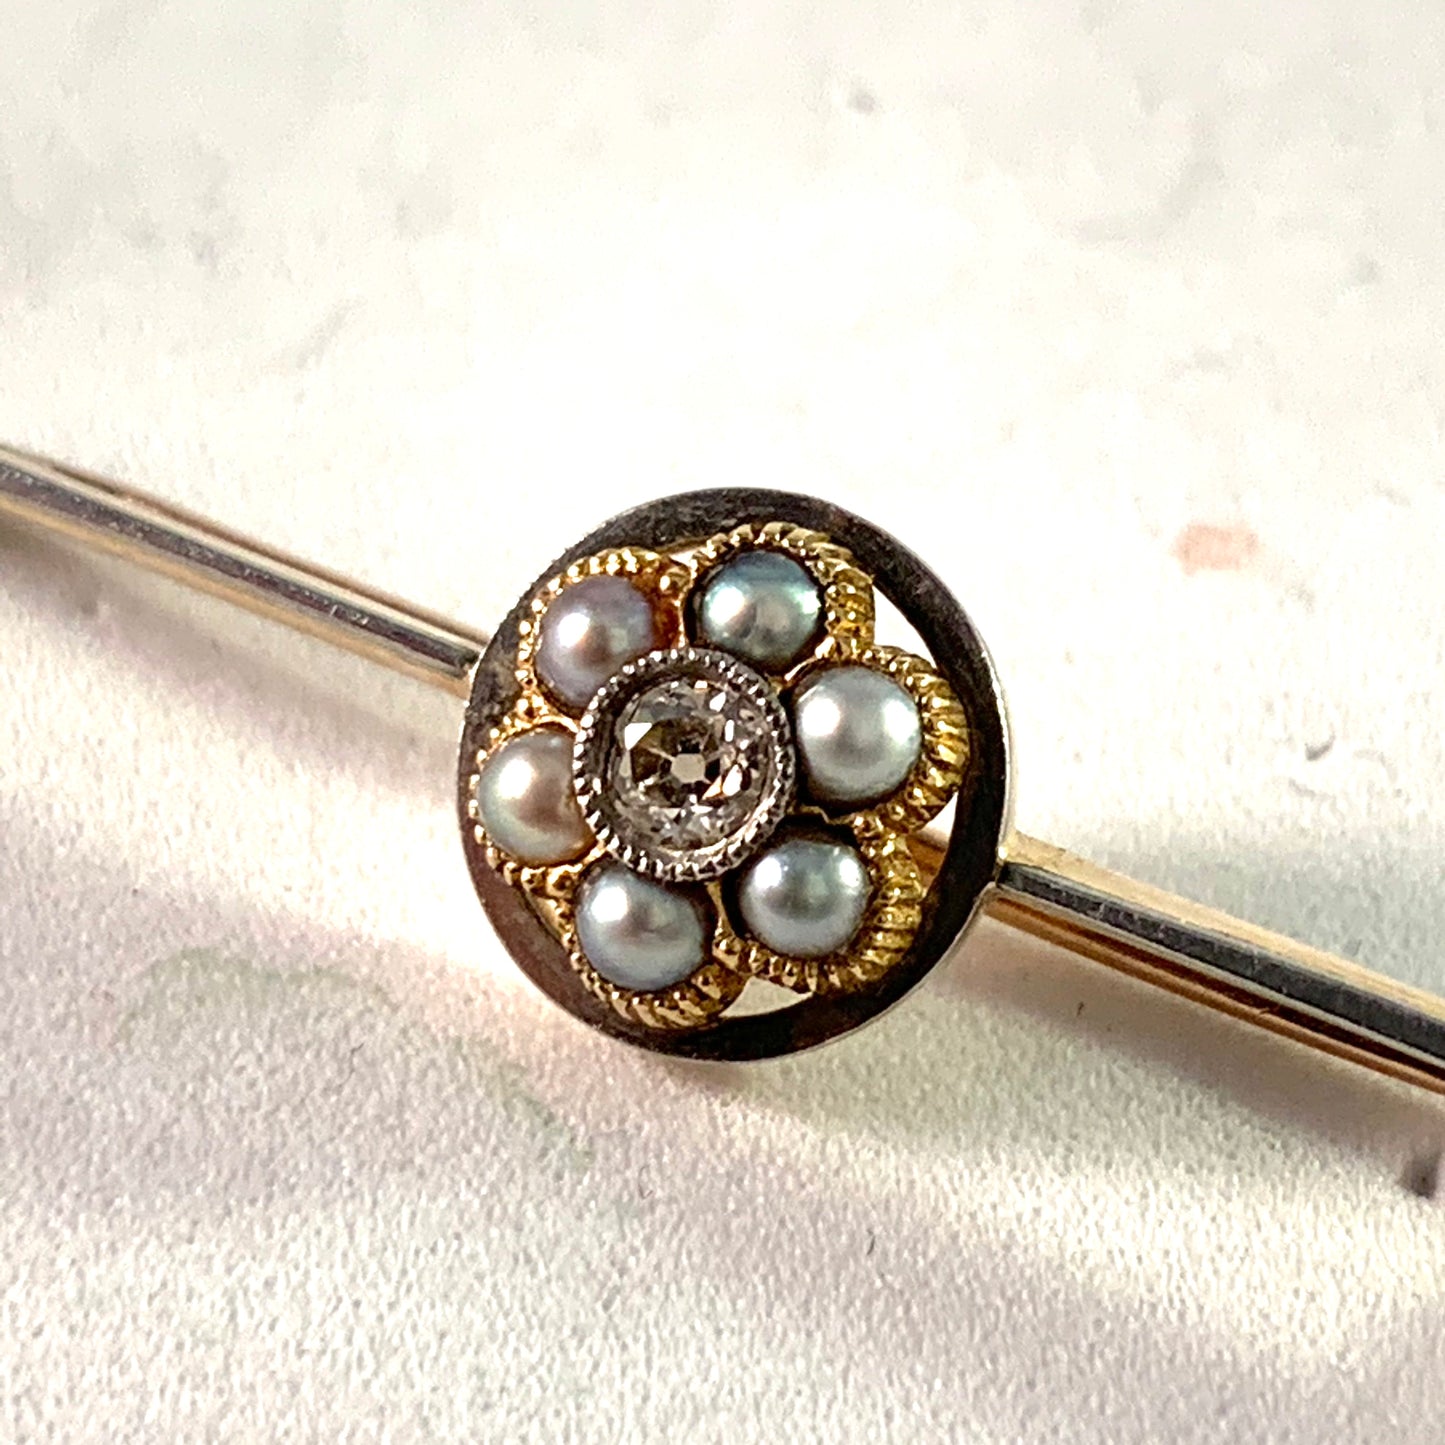 Antique 15k Gold Old Cut Diamond Seed Pearl Brooch Pin.